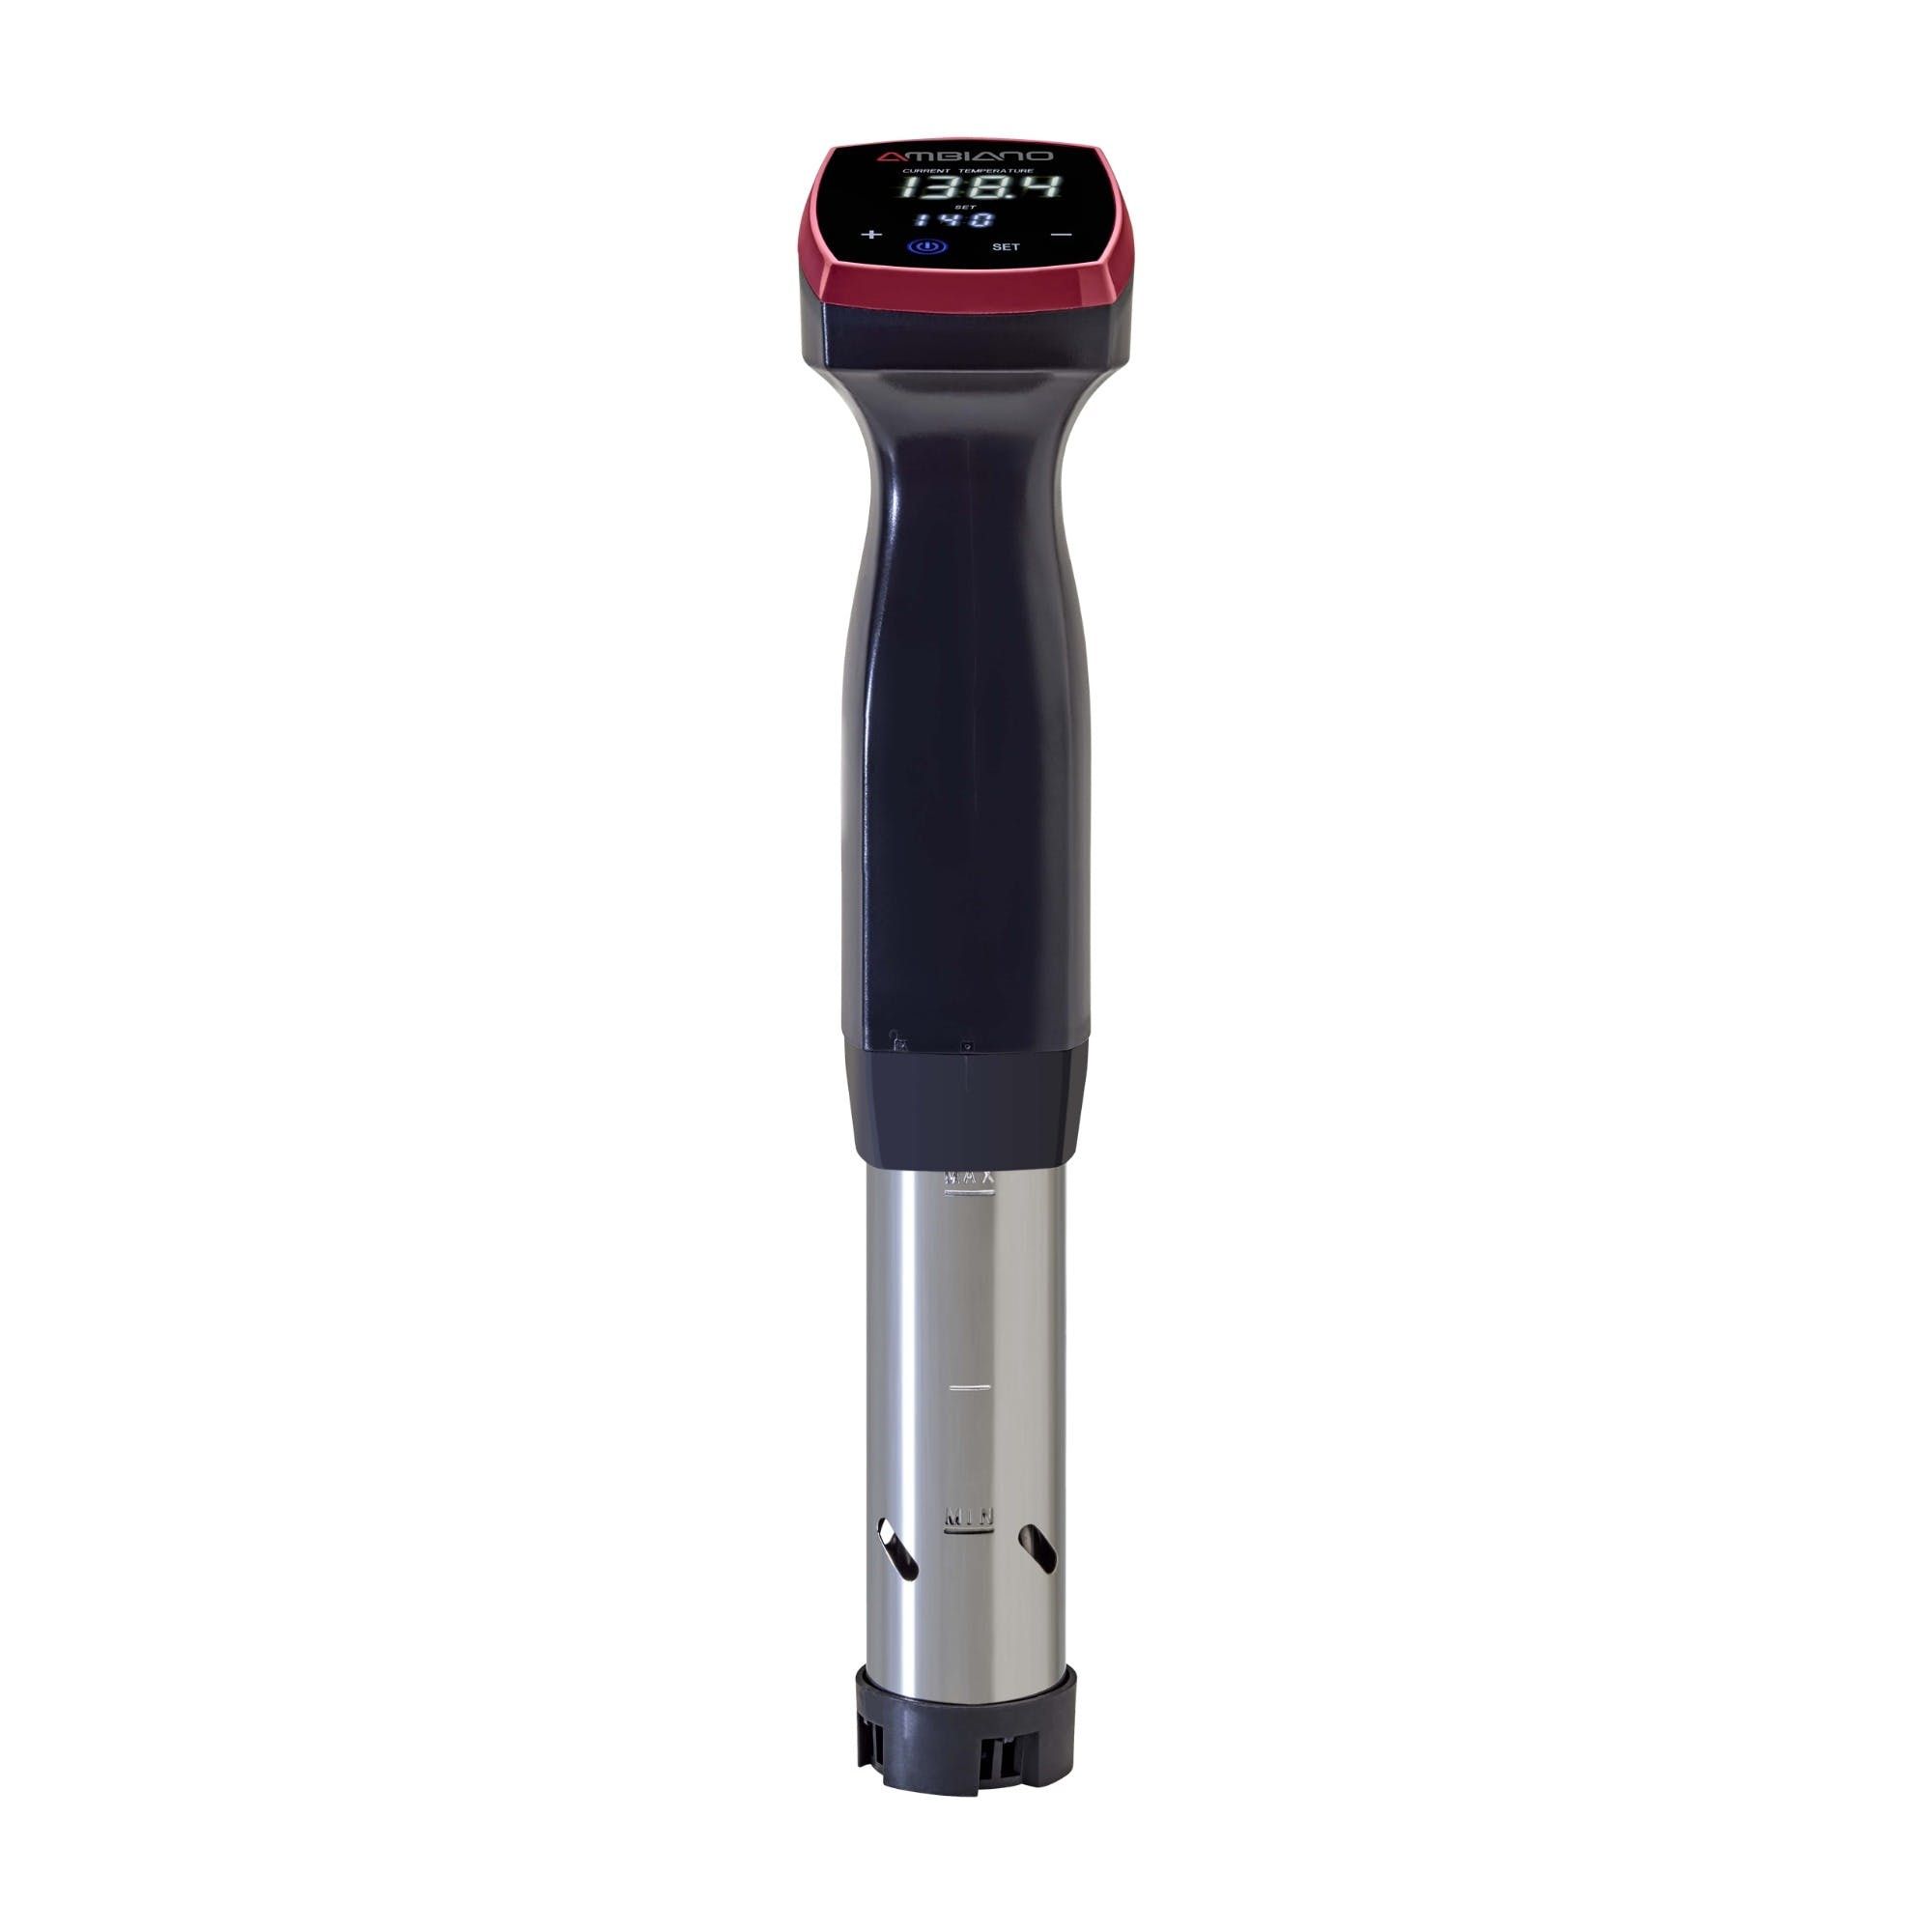 Cook like a pro with Aldi sous vide stick – new kitchen Specialbuys range